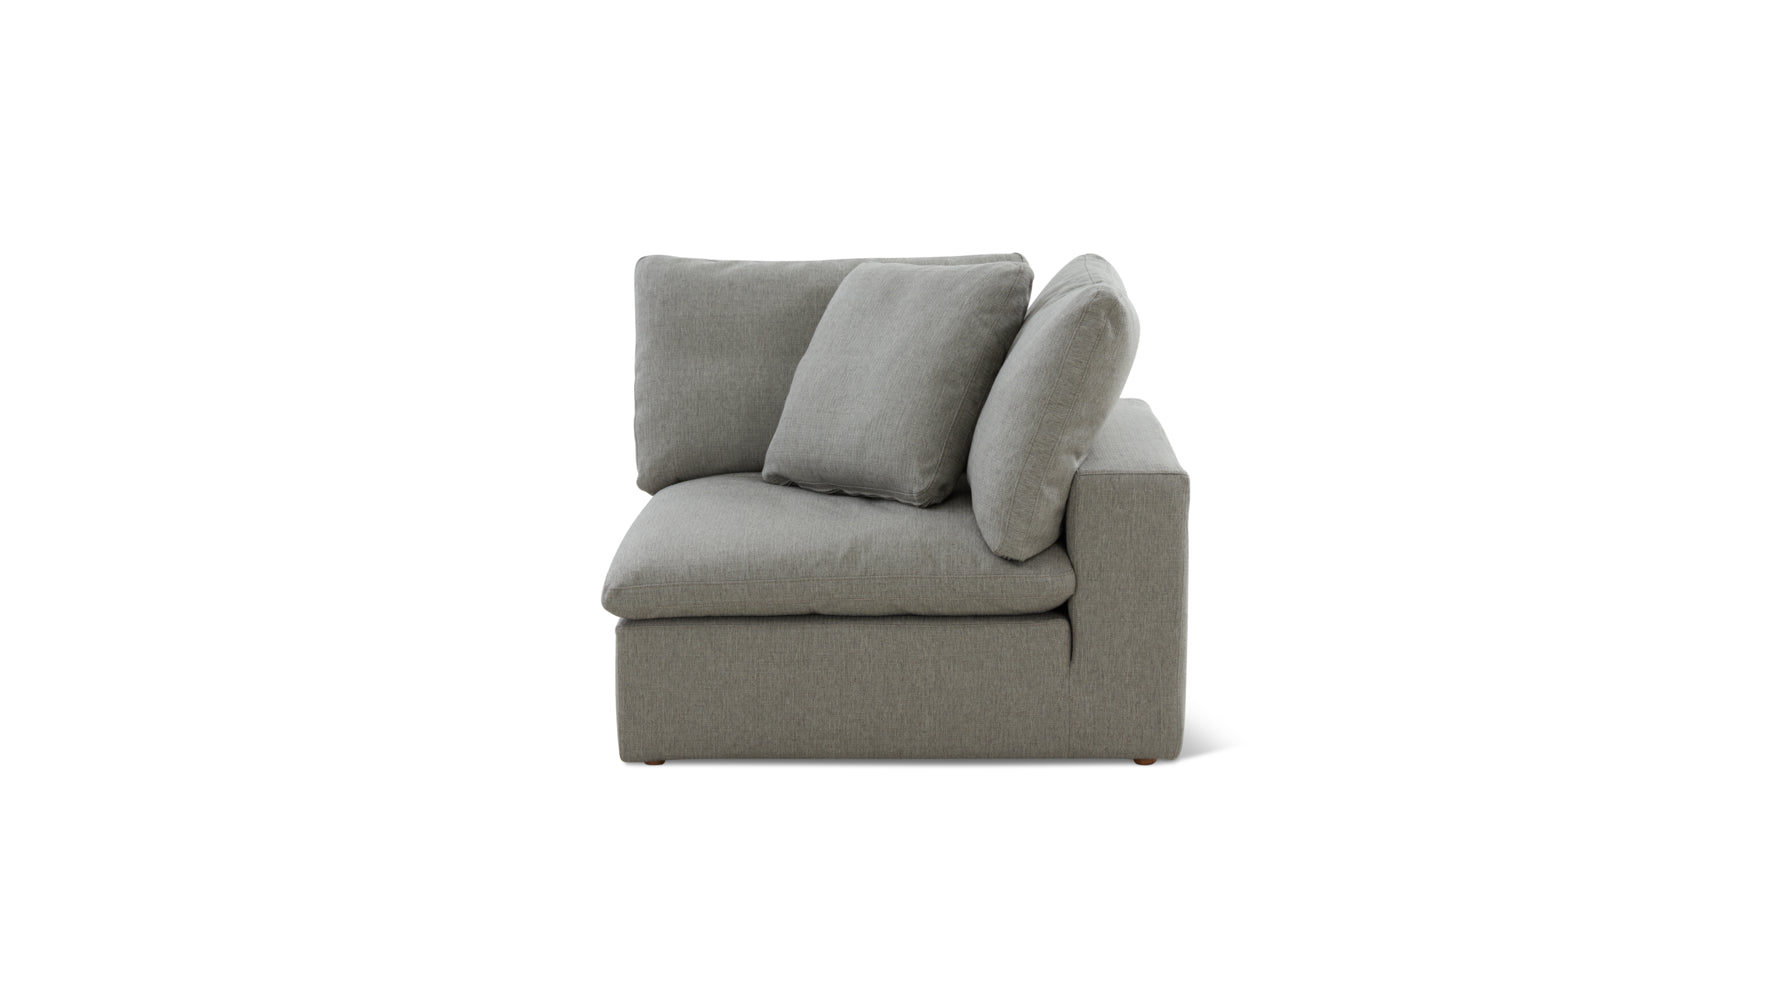 Slipcover - Movie Night™ Corner Chair, Large, Mist (Left or Right) - Image 1